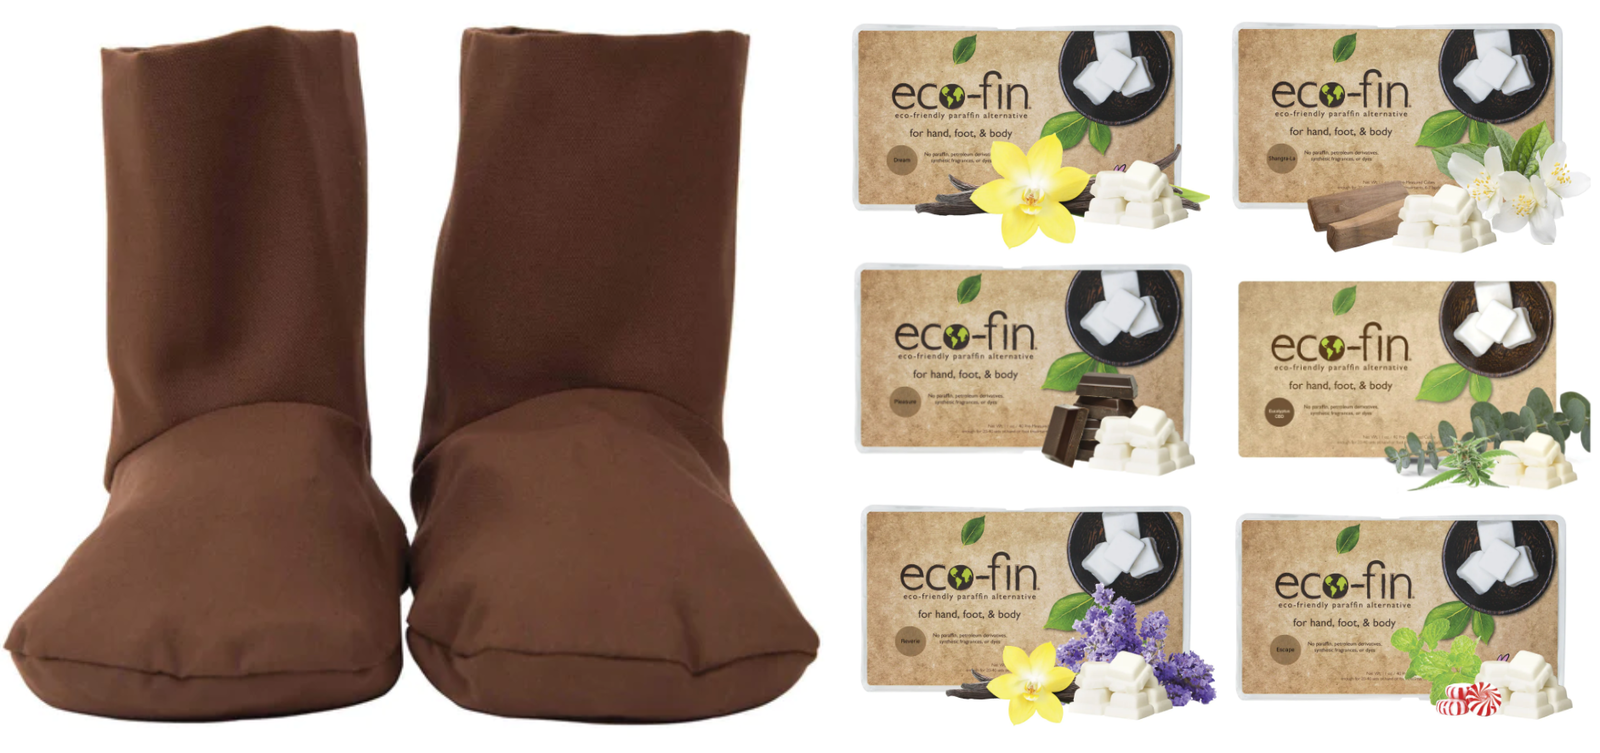 Eco-Fin Luxury Paraffin Alternative Boots with choice of 40 Eco-Fin Cube Tray  - $140.00 - $144.00